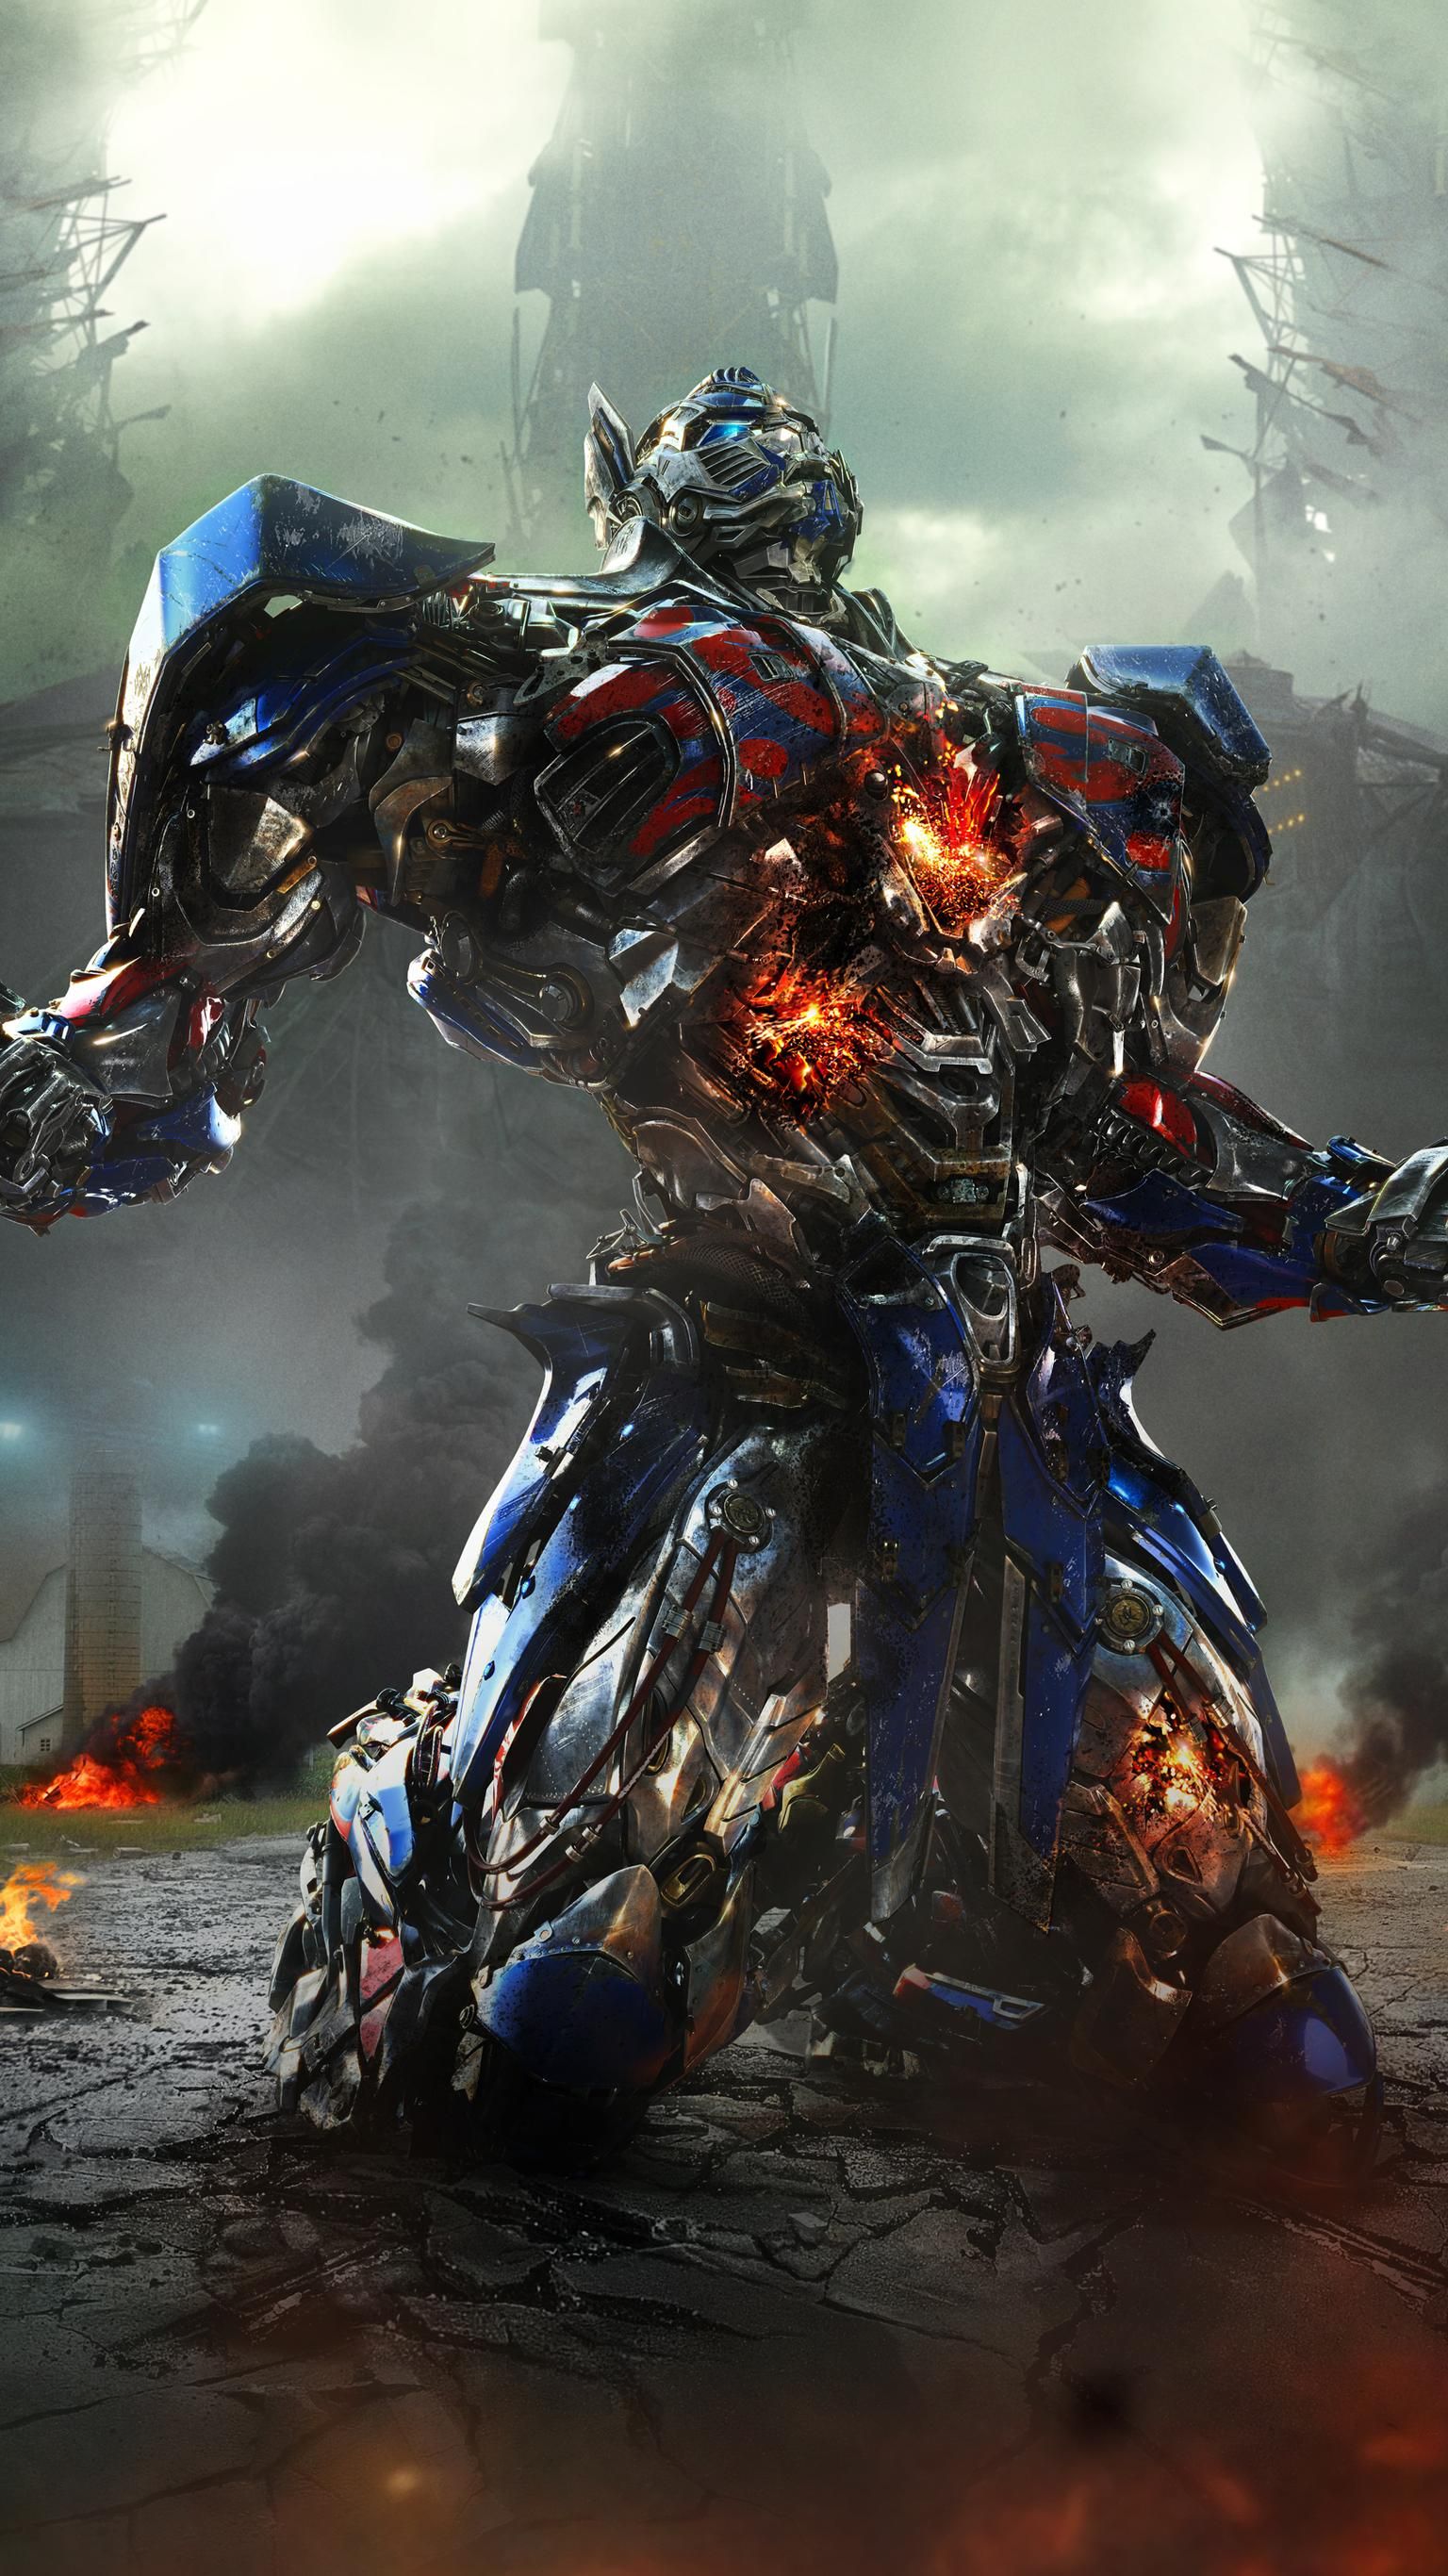 Transformers Age Of Extinction Wallpapers